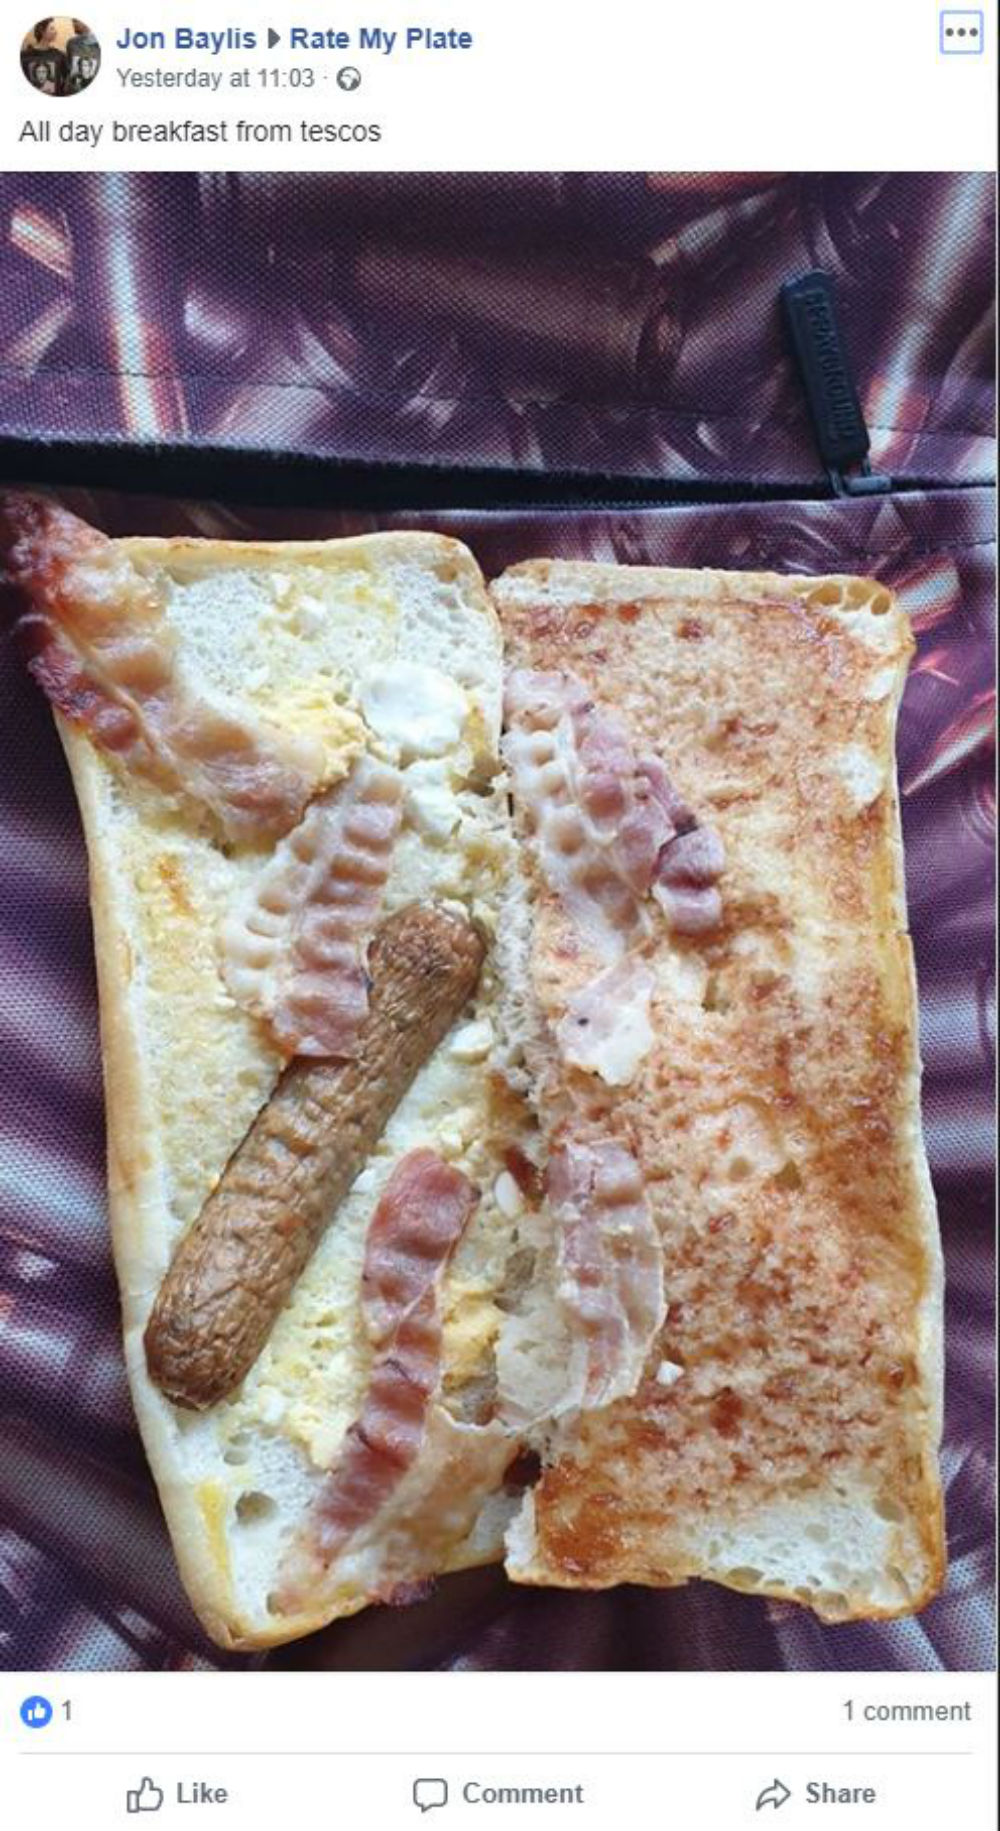 Tesco customer posts snap of "all day breakfast" roll with half sausage plus scraps of bacon and egg